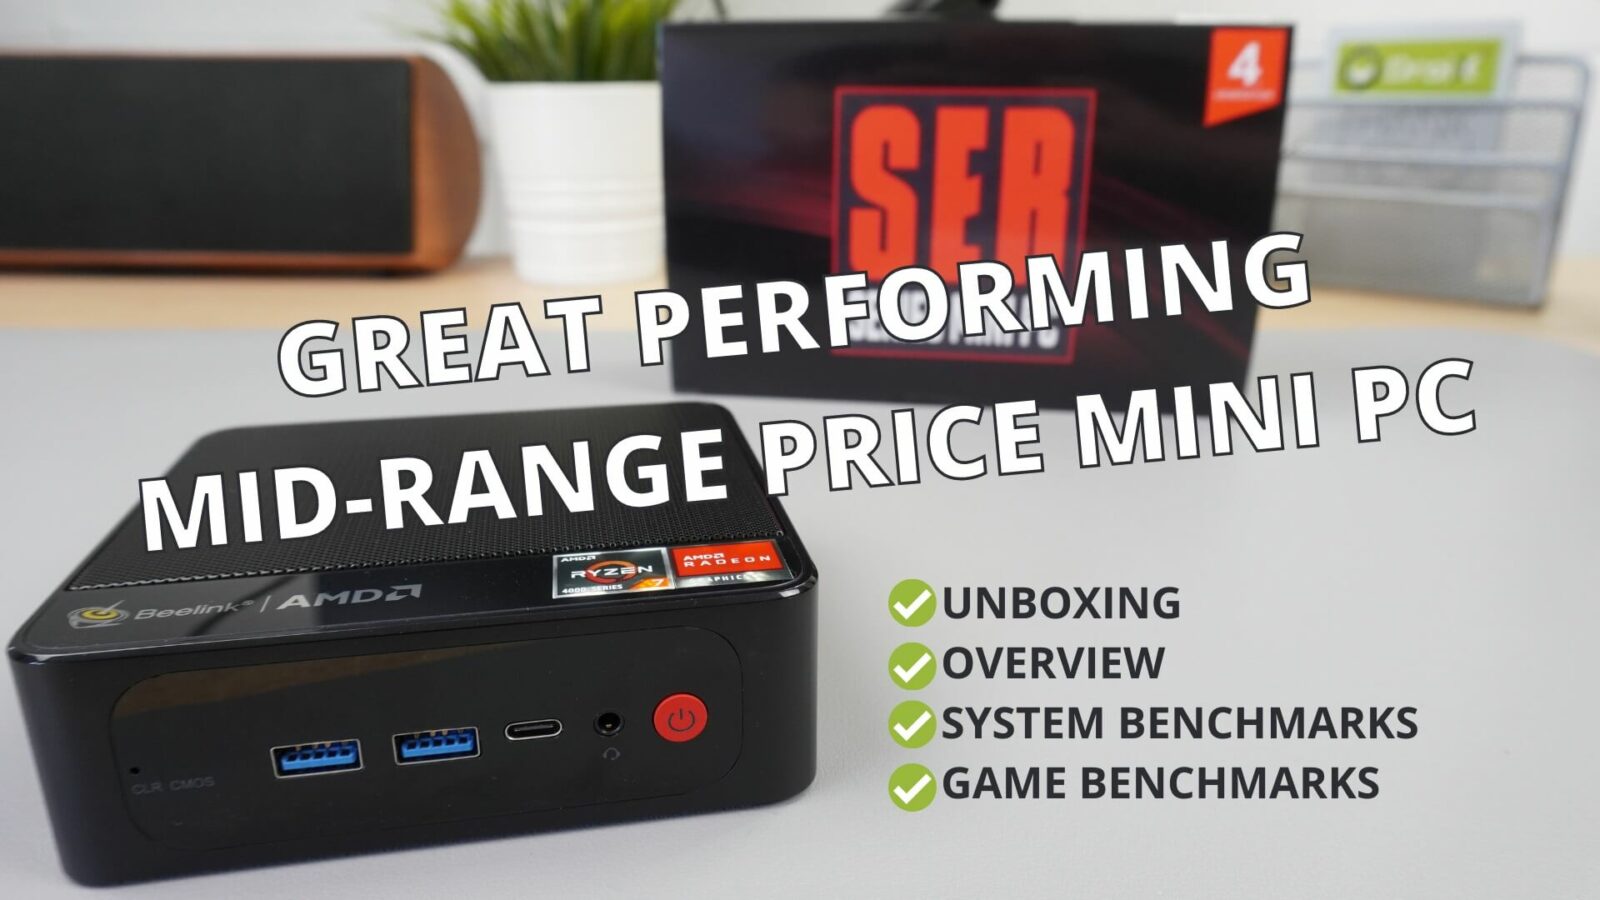 Beelink SER 4 review with video - Great performing mid-range price mini PC!  - DroiX Blogs